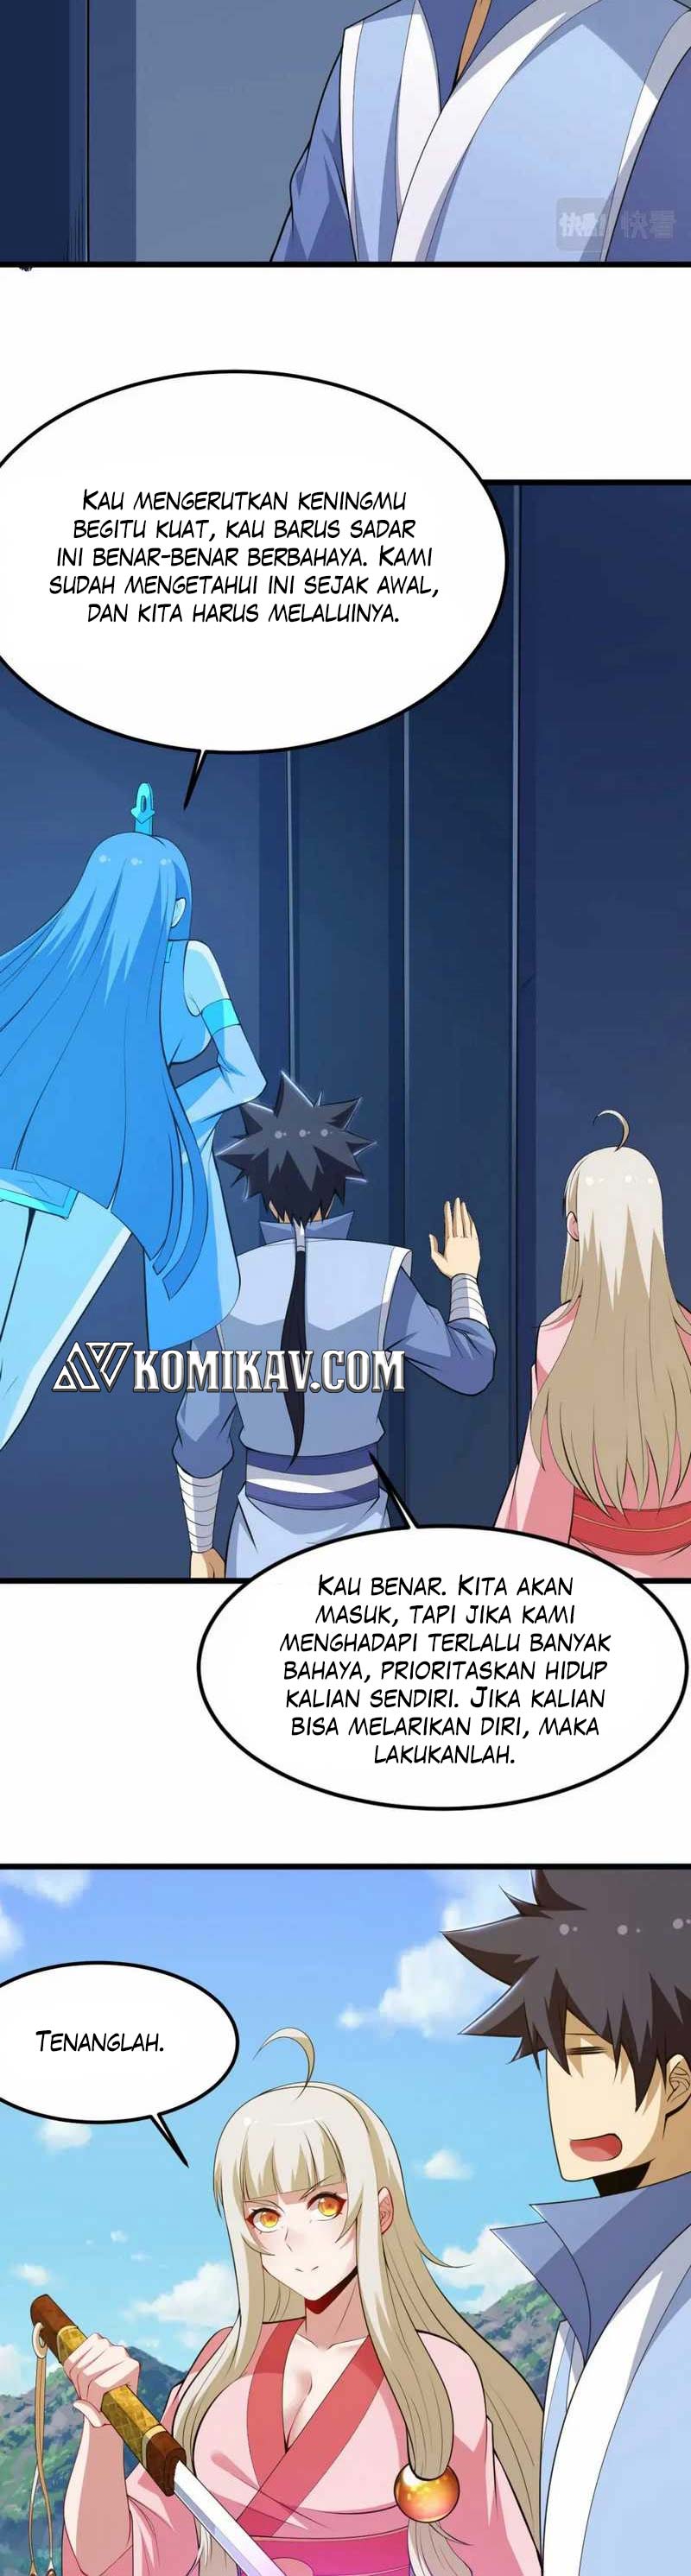 Dilarang COPAS - situs resmi www.mangacanblog.com - Komik i just want to be beaten to death by everyone 147 - chapter 147 148 Indonesia i just want to be beaten to death by everyone 147 - chapter 147 Terbaru 7|Baca Manga Komik Indonesia|Mangacan